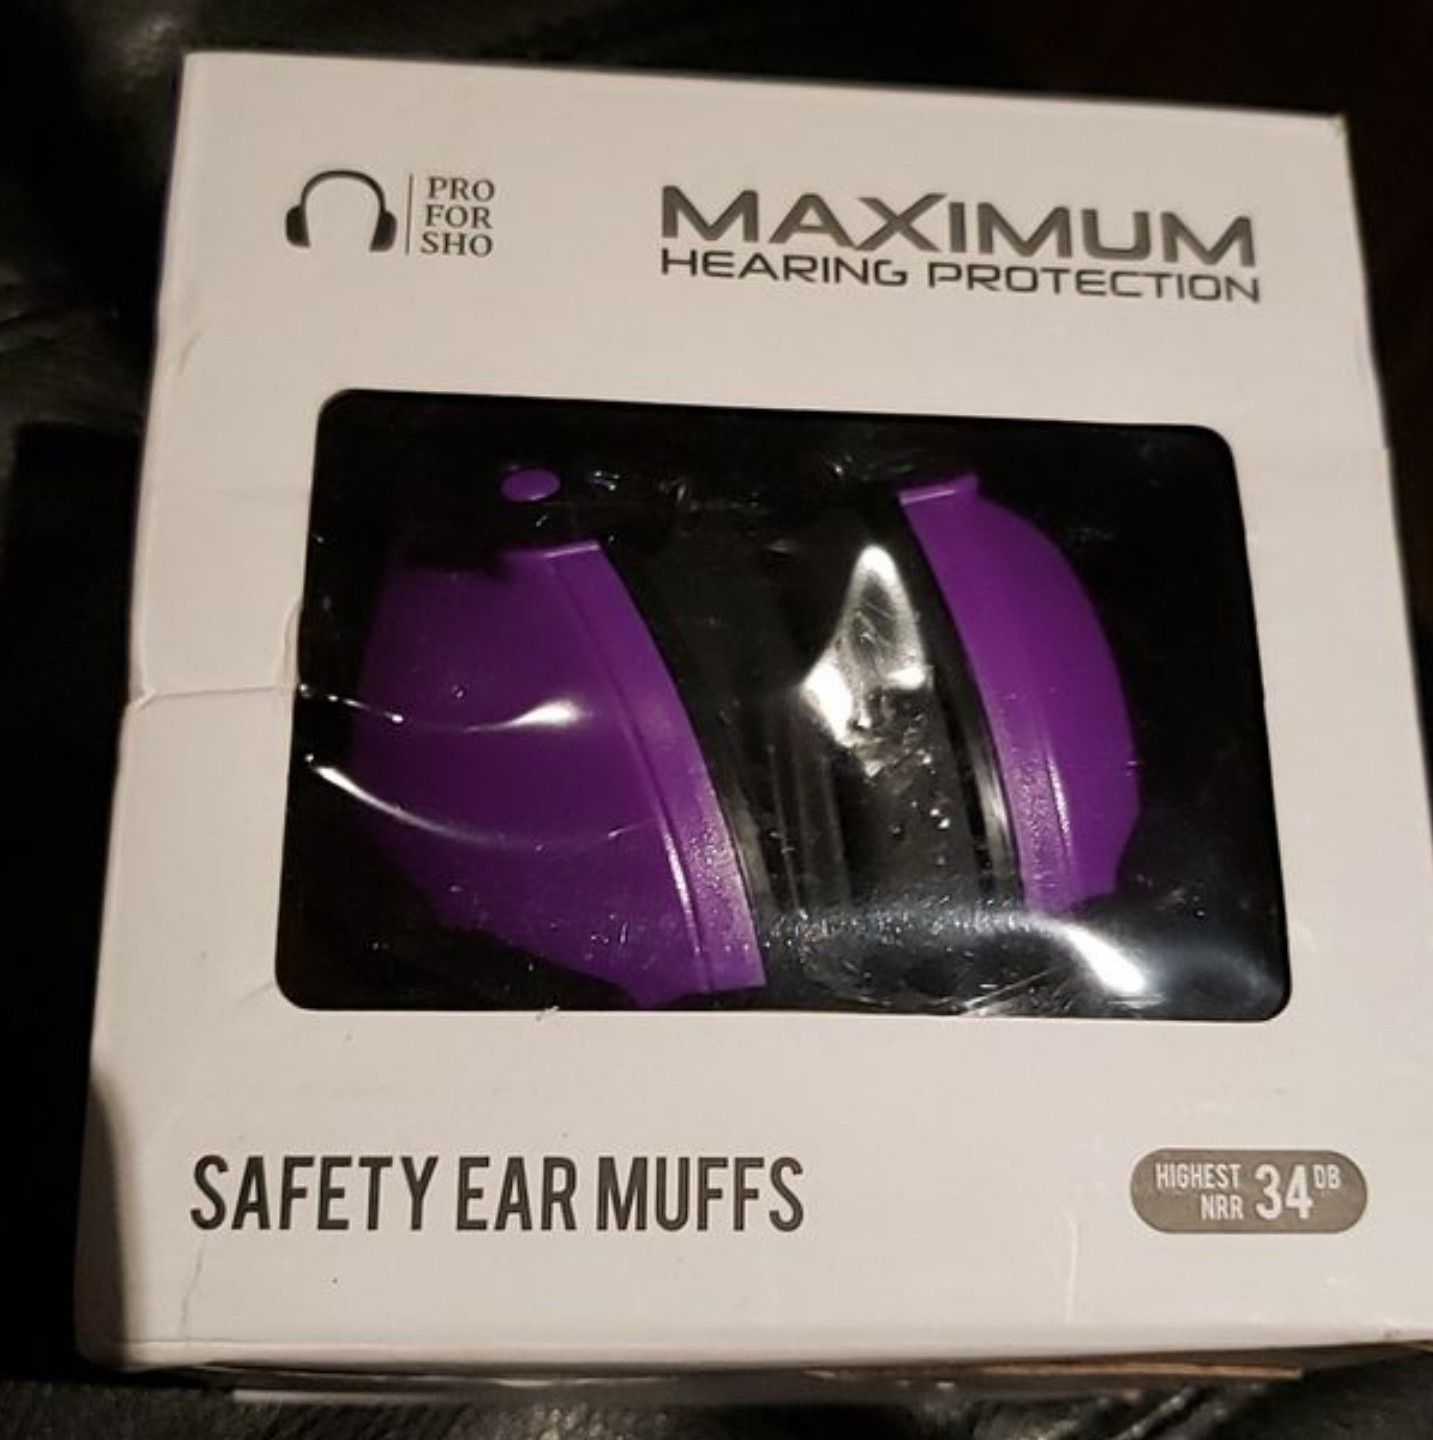 Pro For Sho 34dB Ear Protection - Special Designed Ear Muffs Lighter Weight & Maximum Hearing Protection - Standard Size, Purple